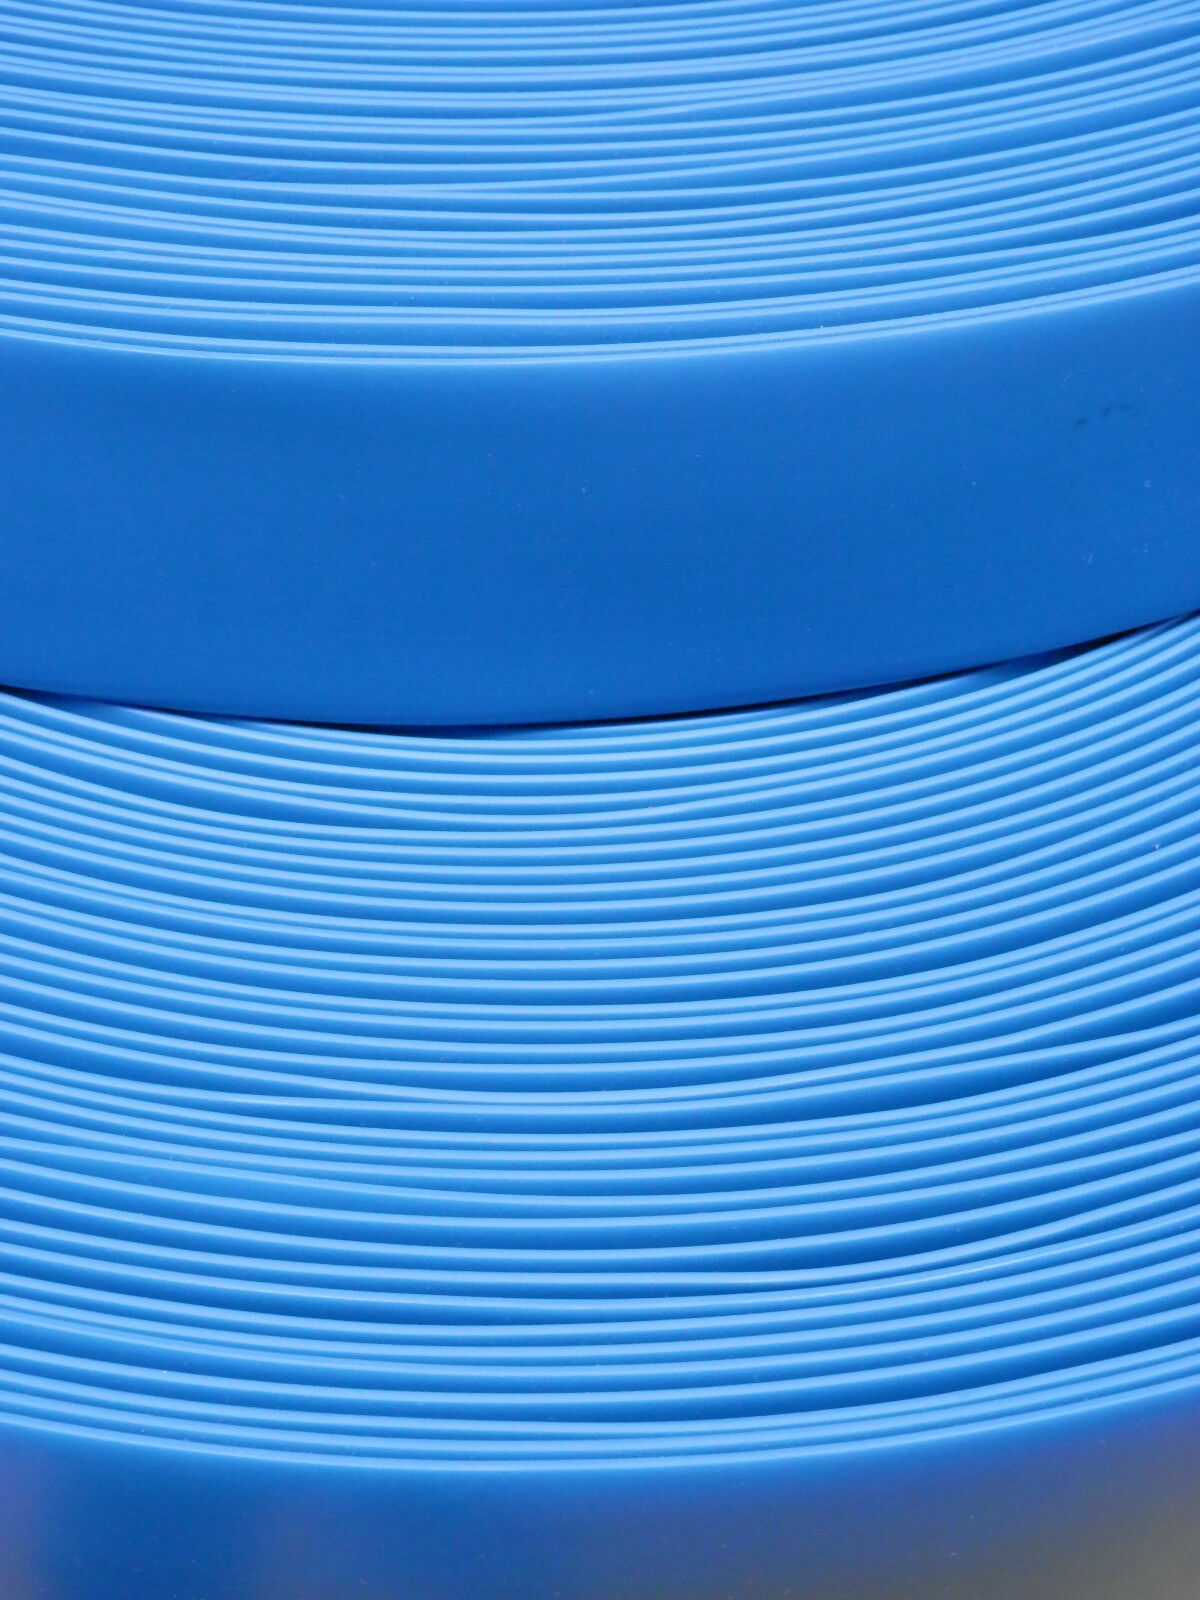 1.5''x10' Royal Blue Vinyl Patio Furniture Strapping